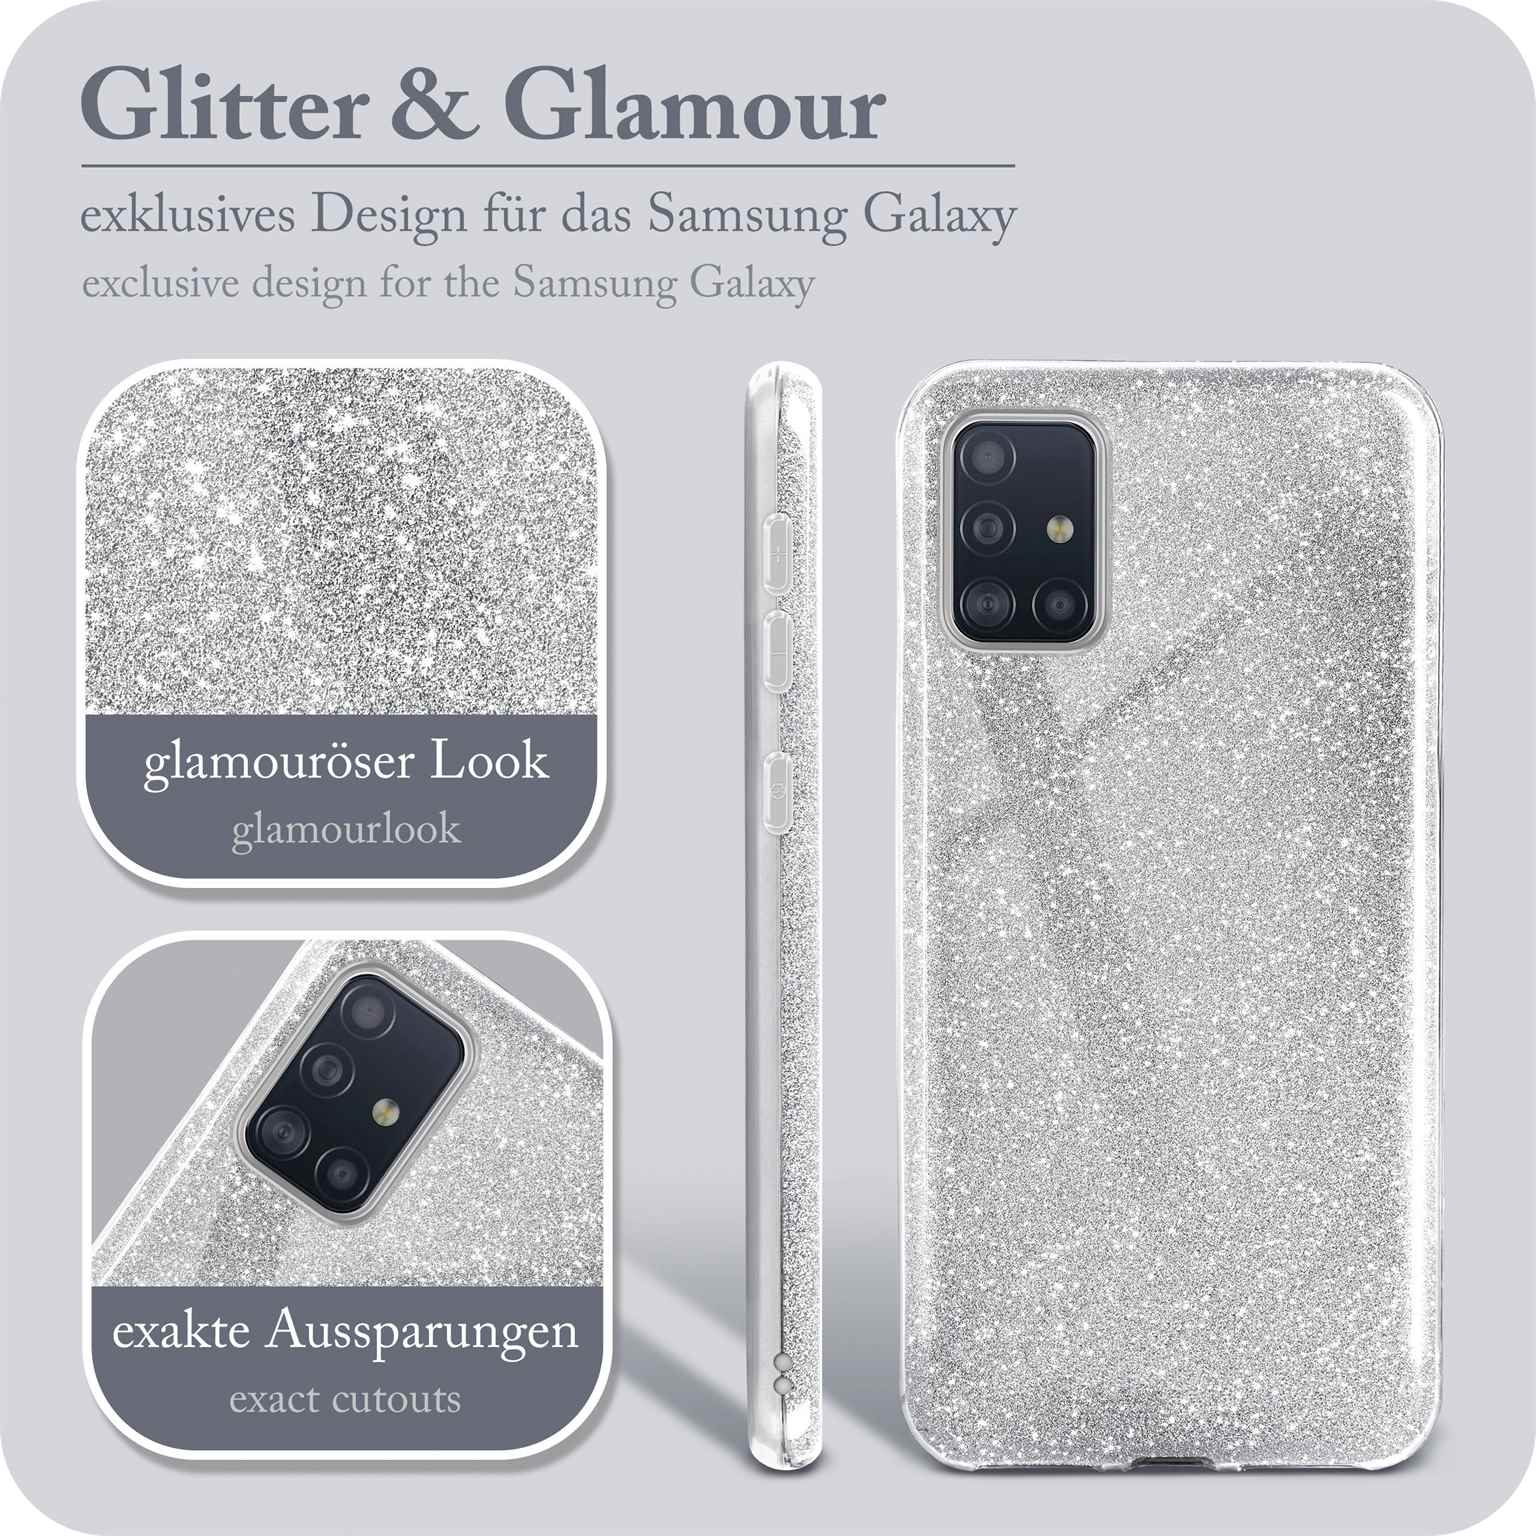 ONEFLOW Glitter Case, Backcover, Samsung, Galaxy - A71, Silver Sparkle